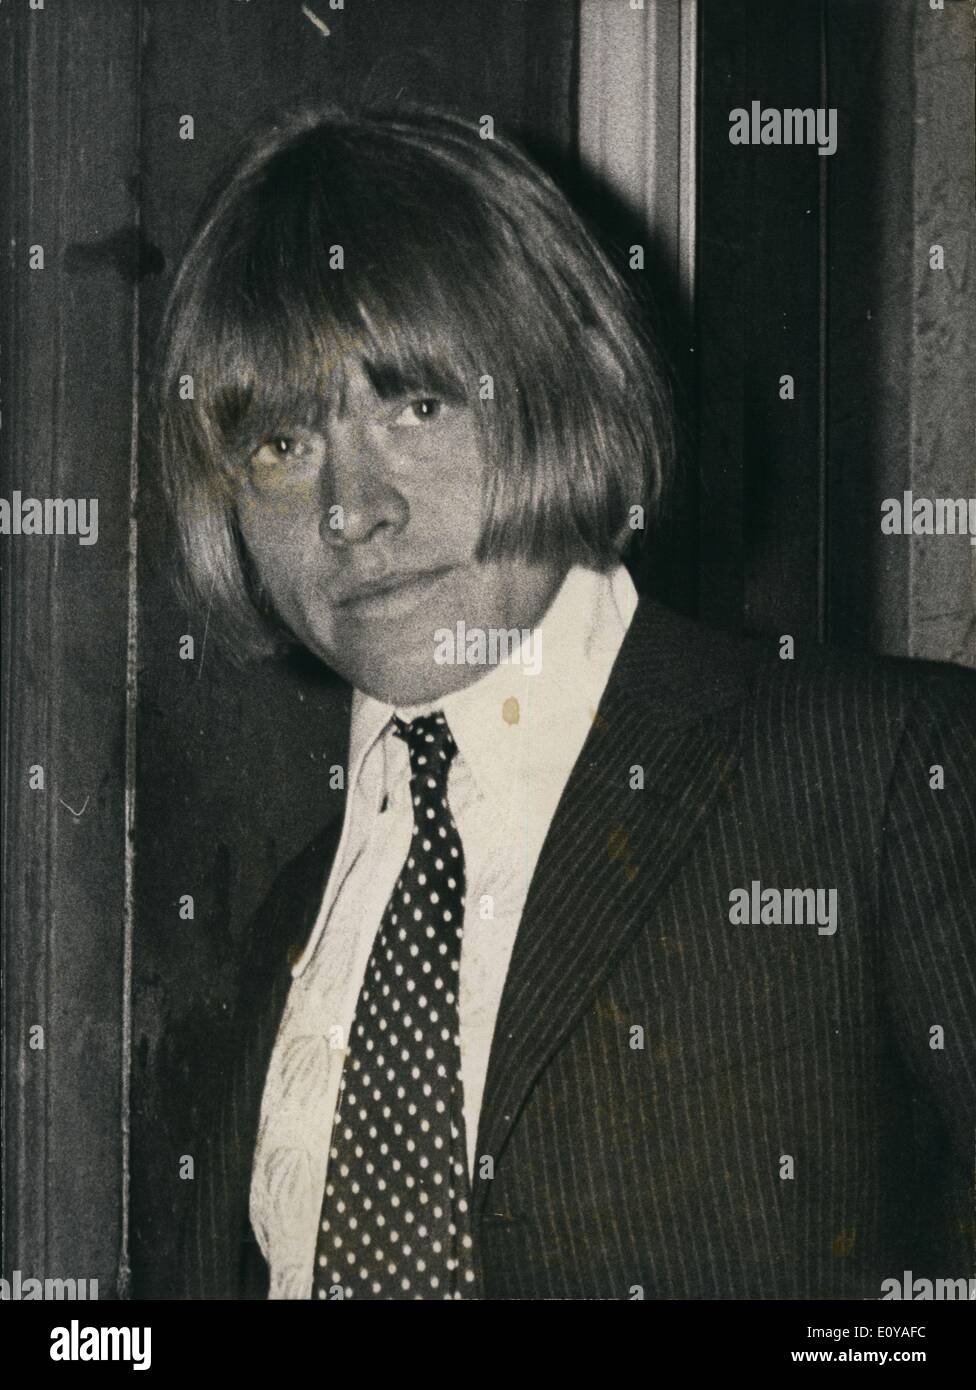 Jul. 07, 1969 - Brian Jones found dead: Brian Jones, who recently left the Rolling Stones pop group, was found dead eary today in his open-air swimming pool at his &pound;30,000 country home at Hartfield, Sussex. He is believed to have died during a midnight swim, apparently as the result of an asthma attack. photo shows Brian Jones-Who was found dead early today. Stock Photo